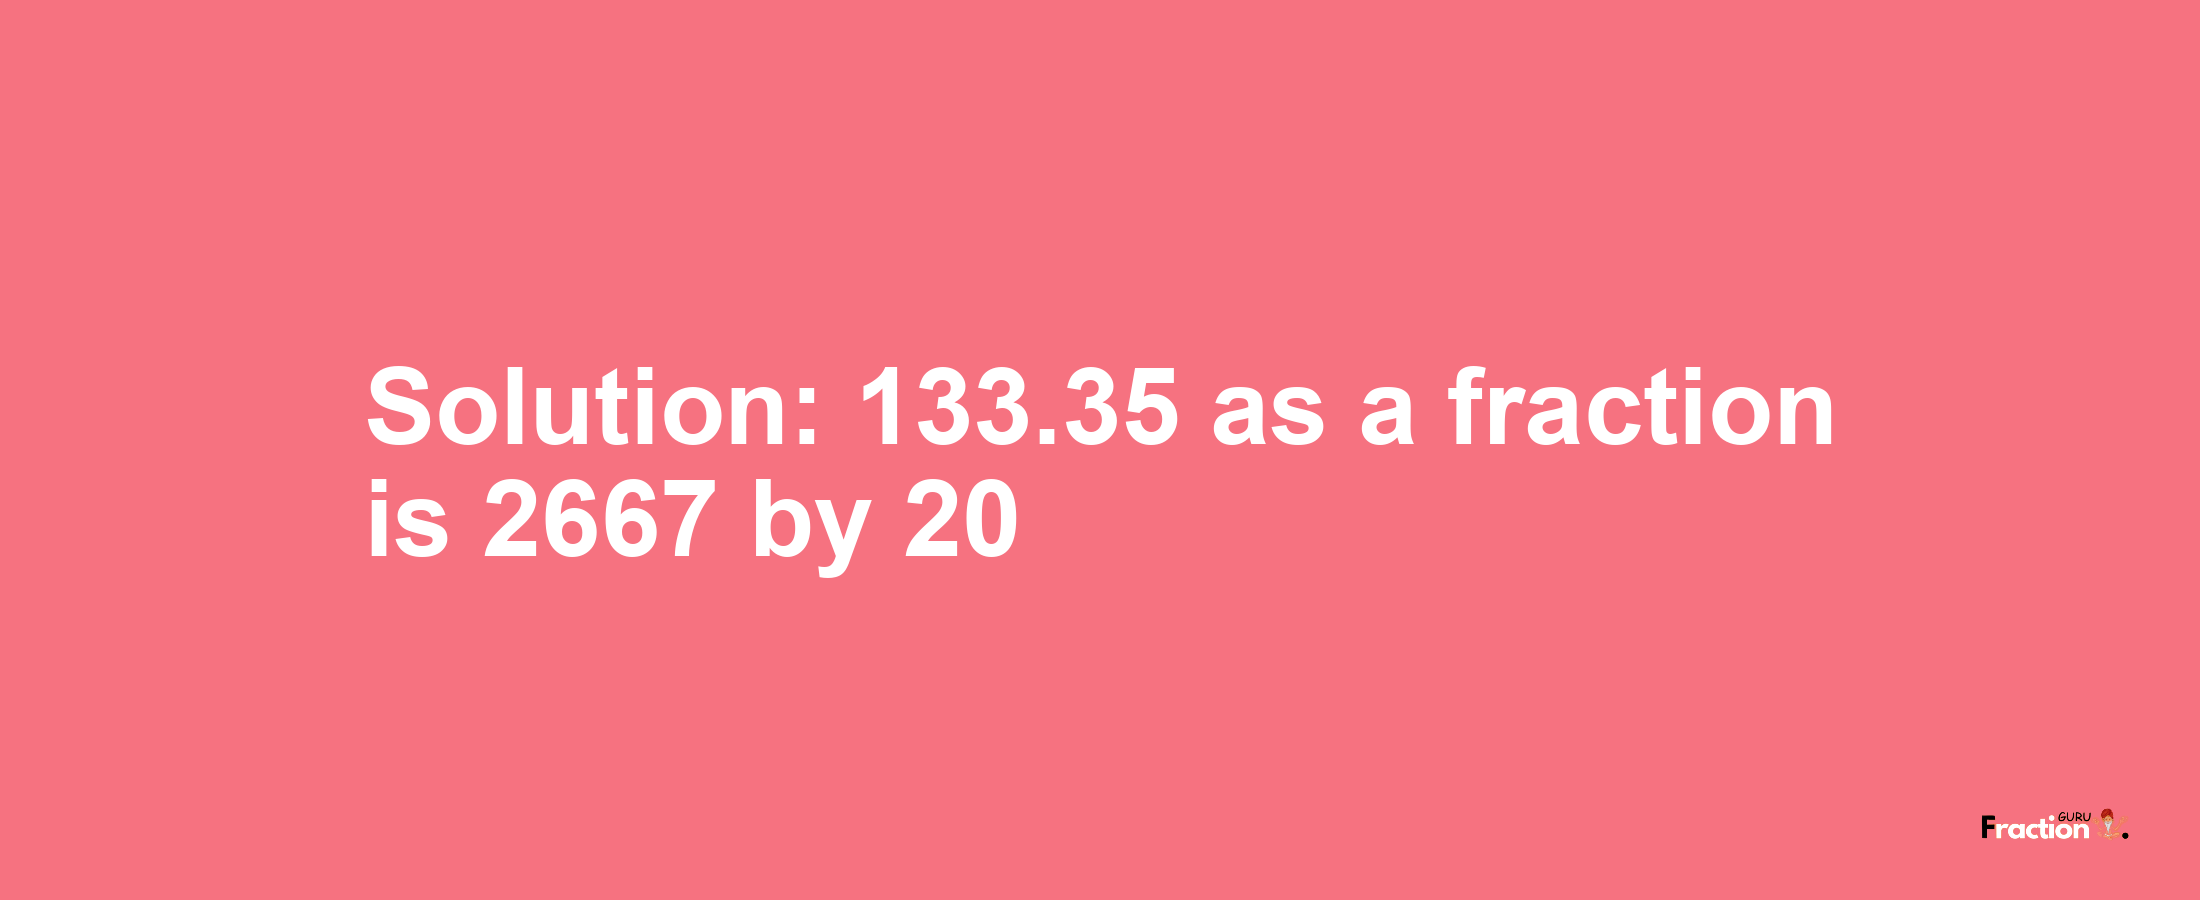 Solution:133.35 as a fraction is 2667/20